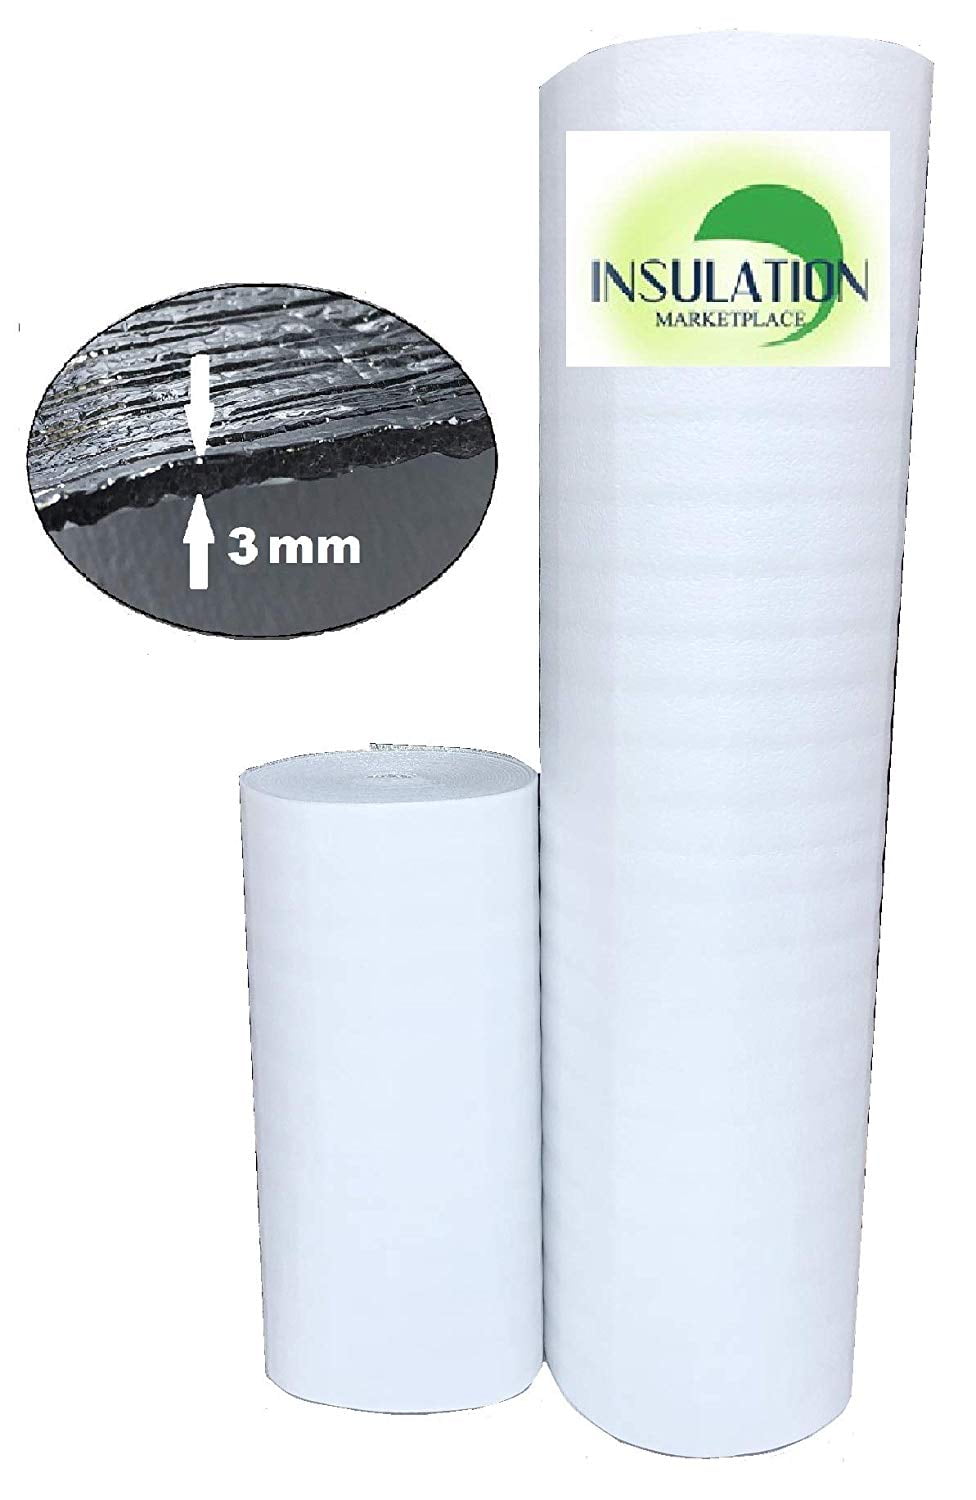 Boat & Shed Reflector Bubble Foil Save Energy Insulation Kit Car Garage Doors Aluminum Foil Insulation Roll Self-adhesive Motorhome Wall Floor Various Size Foil Insulation Roll For Use With Loft